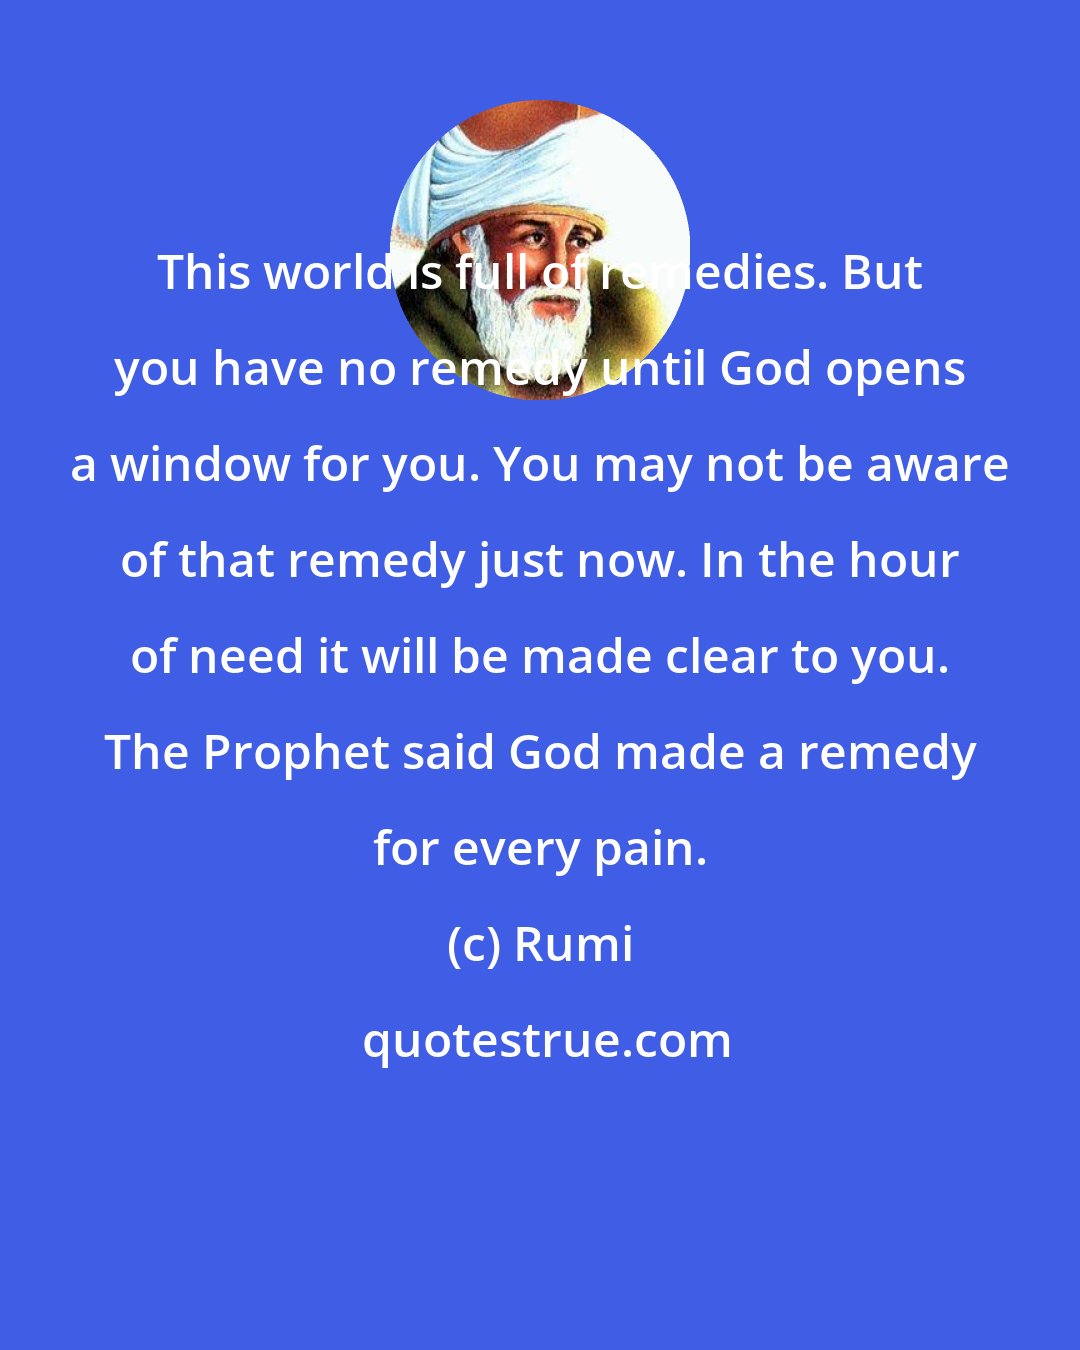 Rumi: This world is full of remedies. But you have no remedy until God opens a window for you. You may not be aware of that remedy just now. In the hour of need it will be made clear to you. The Prophet said God made a remedy for every pain.